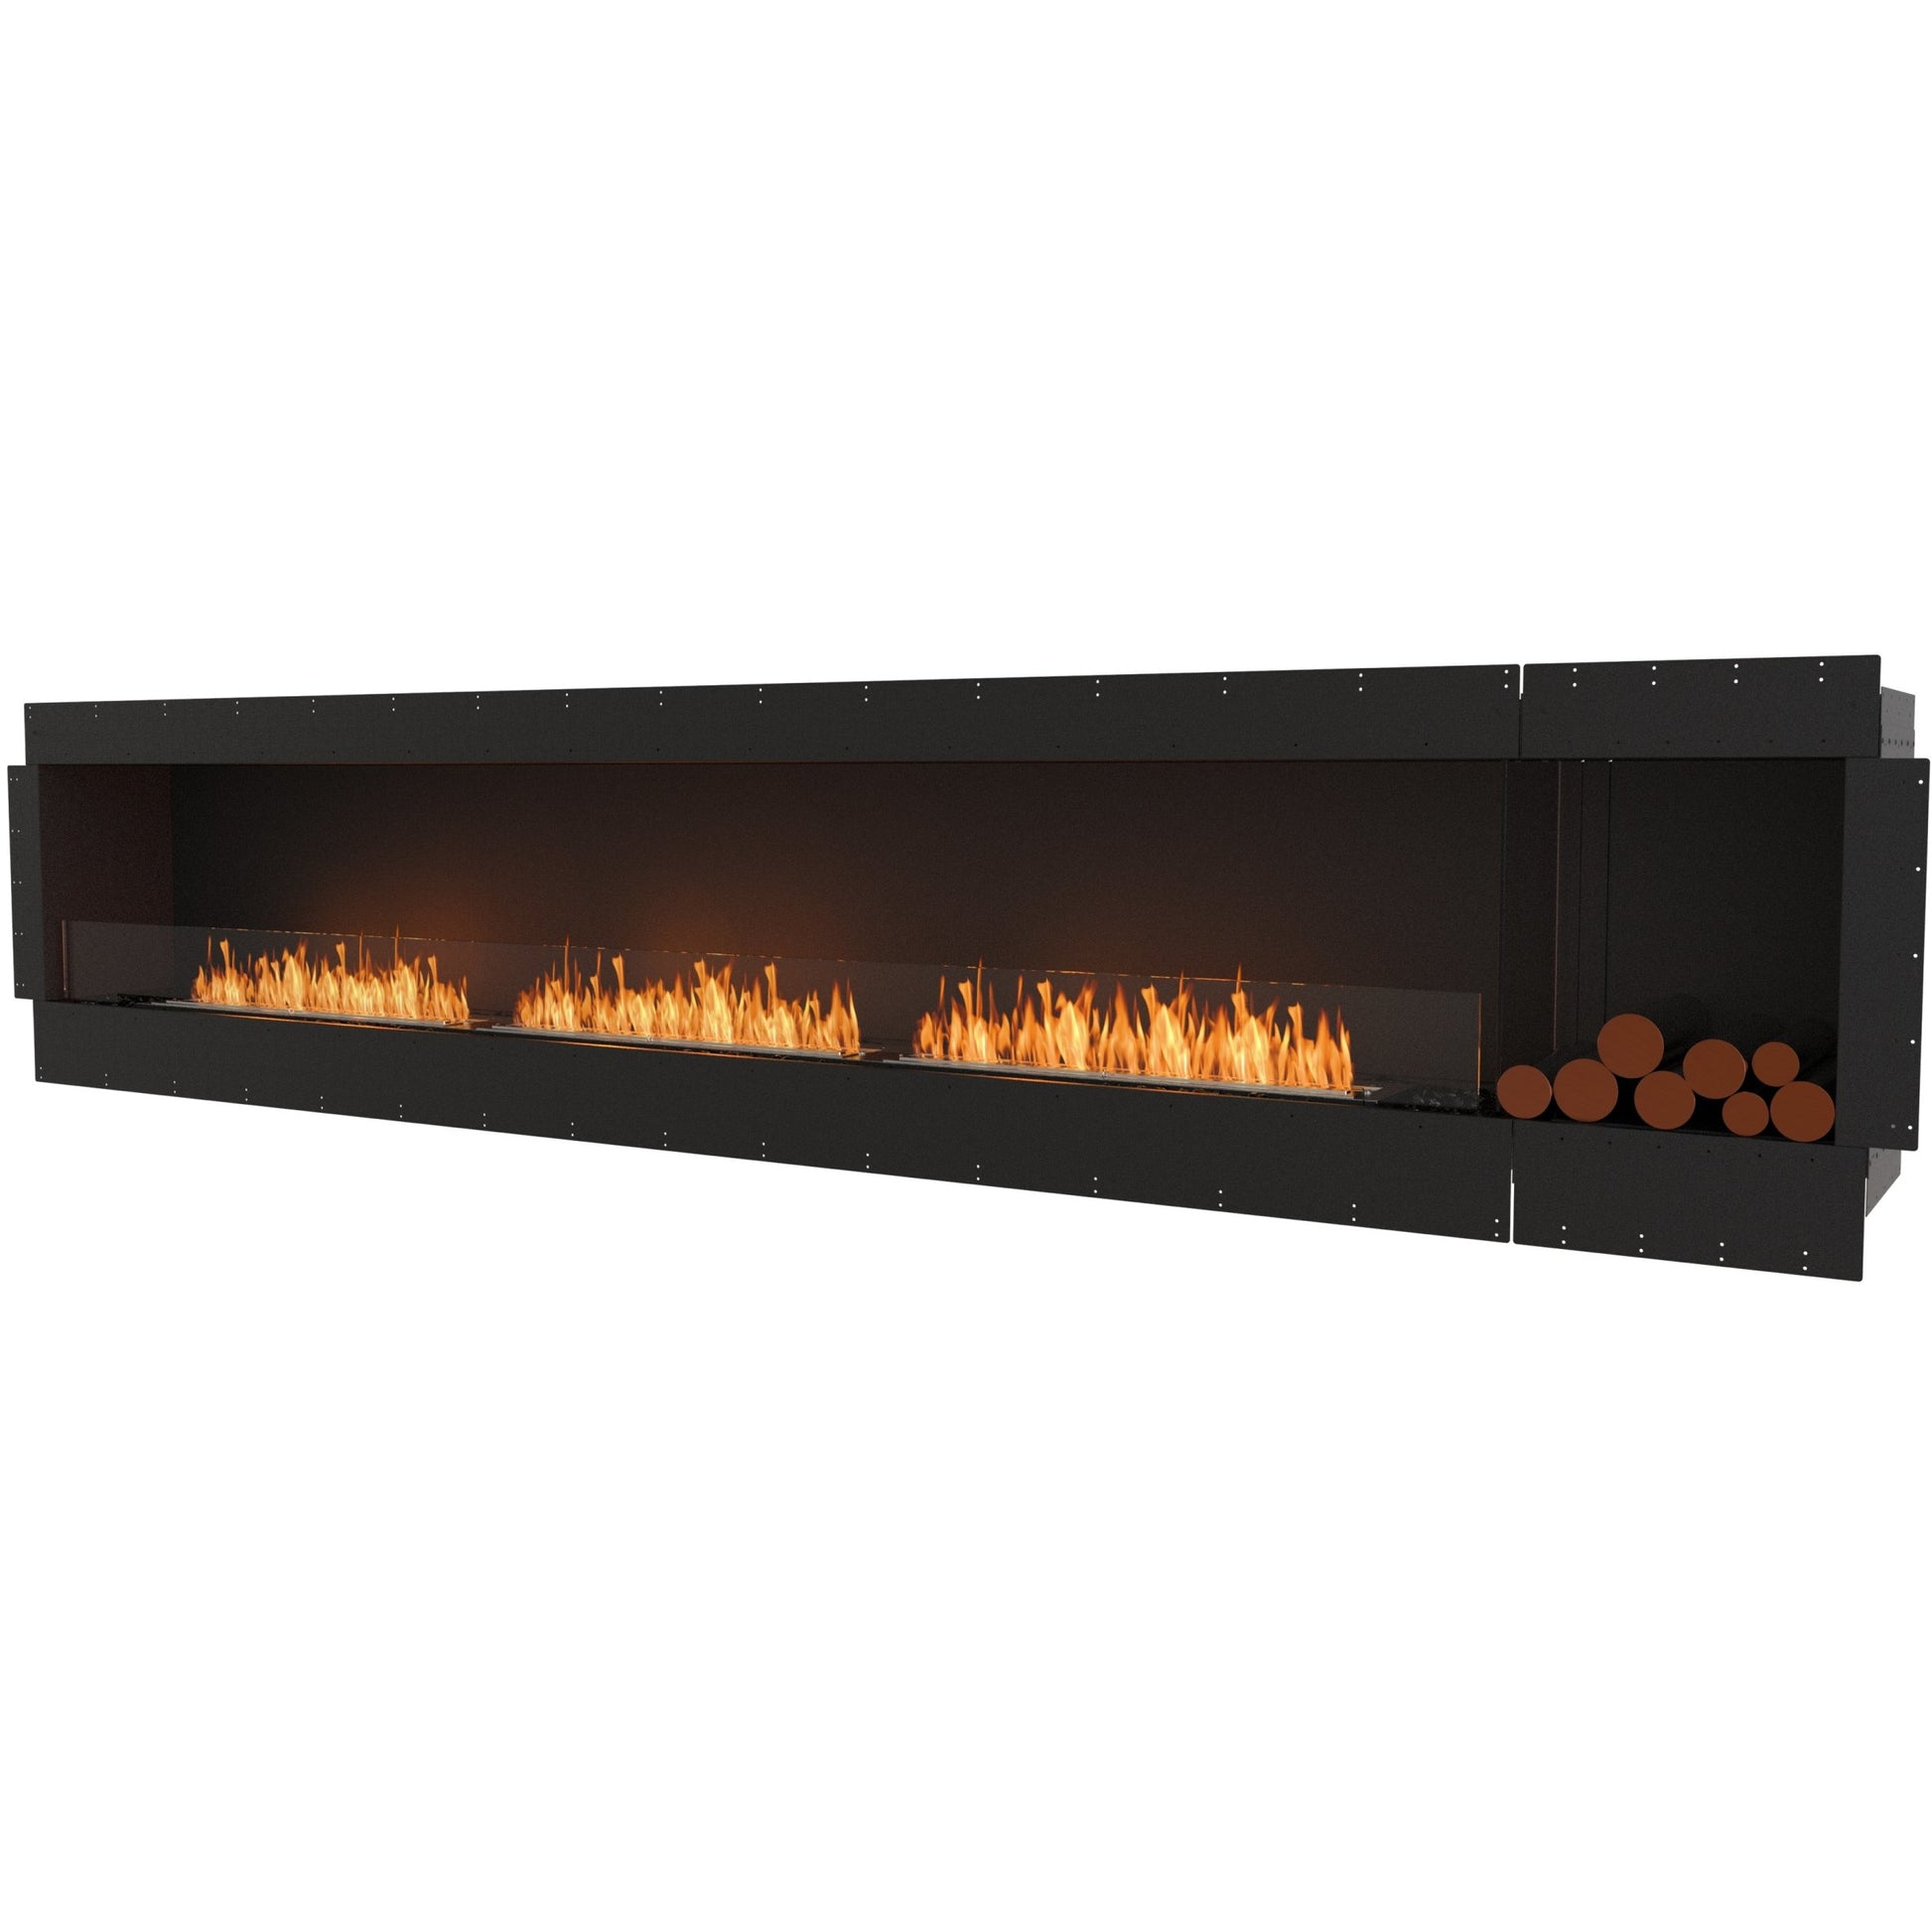 EcoSmart Flex 140SS.BXR; Best bioethanol fireplace in black -  Flueless wall fireplace 148 inches with right decorative box for sale